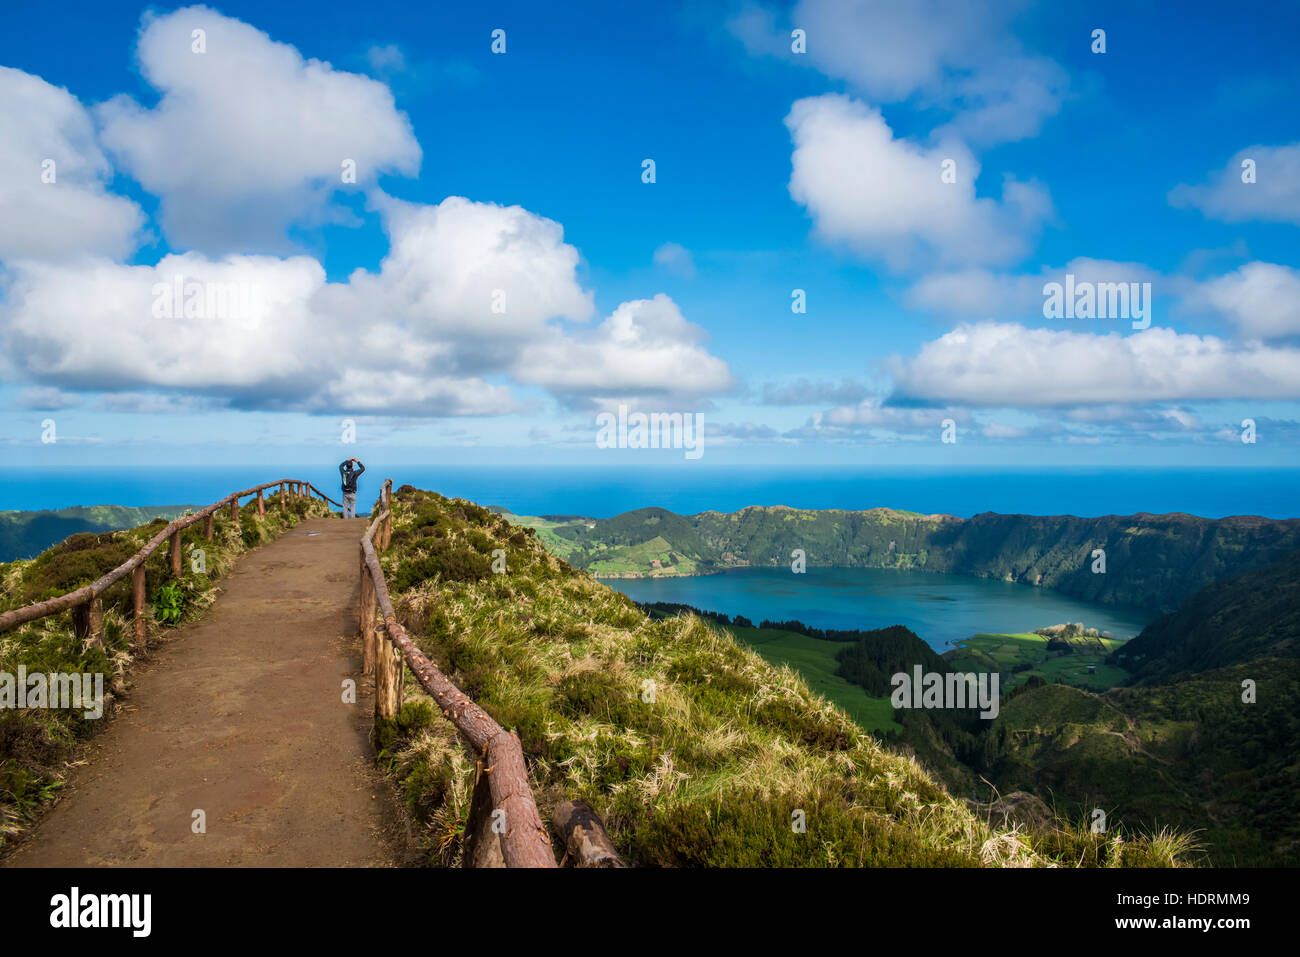 The spectacular view from Sete Cidades; Sao Miguel, Azores, Portugal Stock Photo